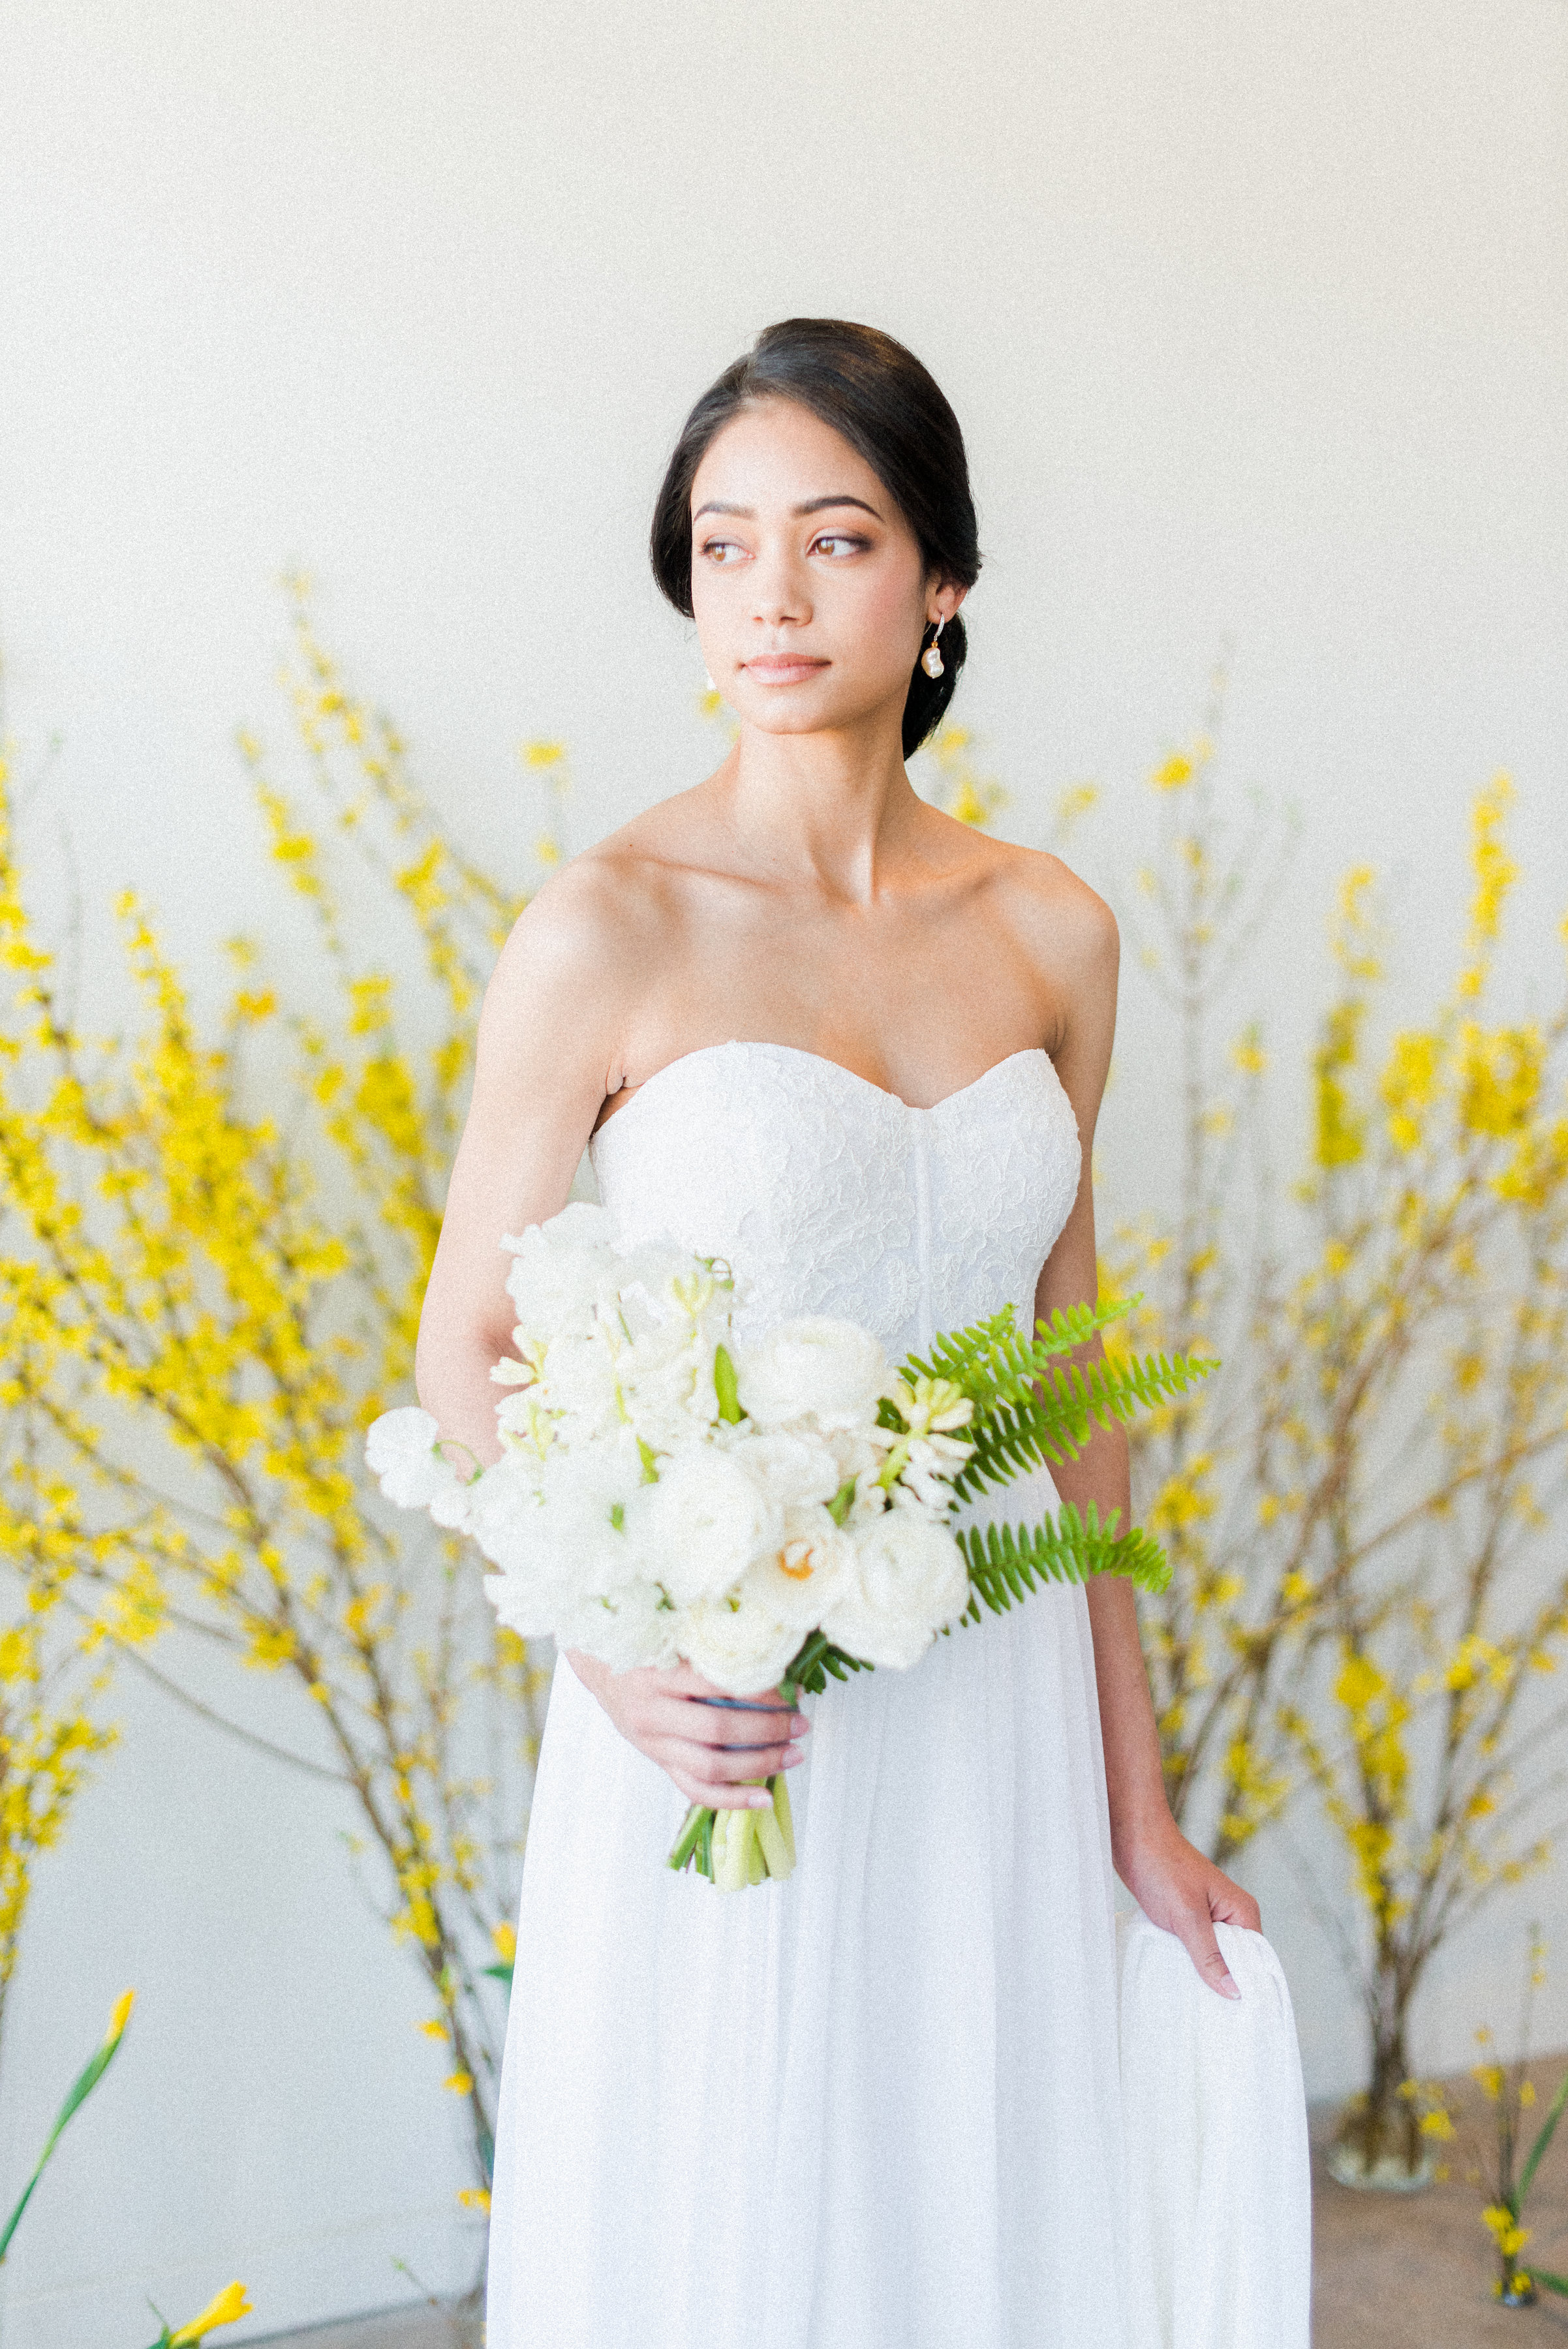  Anne Barge "Lily" wedding dress | Spring Bridal Inspiration from Little White Dress Bridal Shop in Denver, Colorado | Decorus Photography 